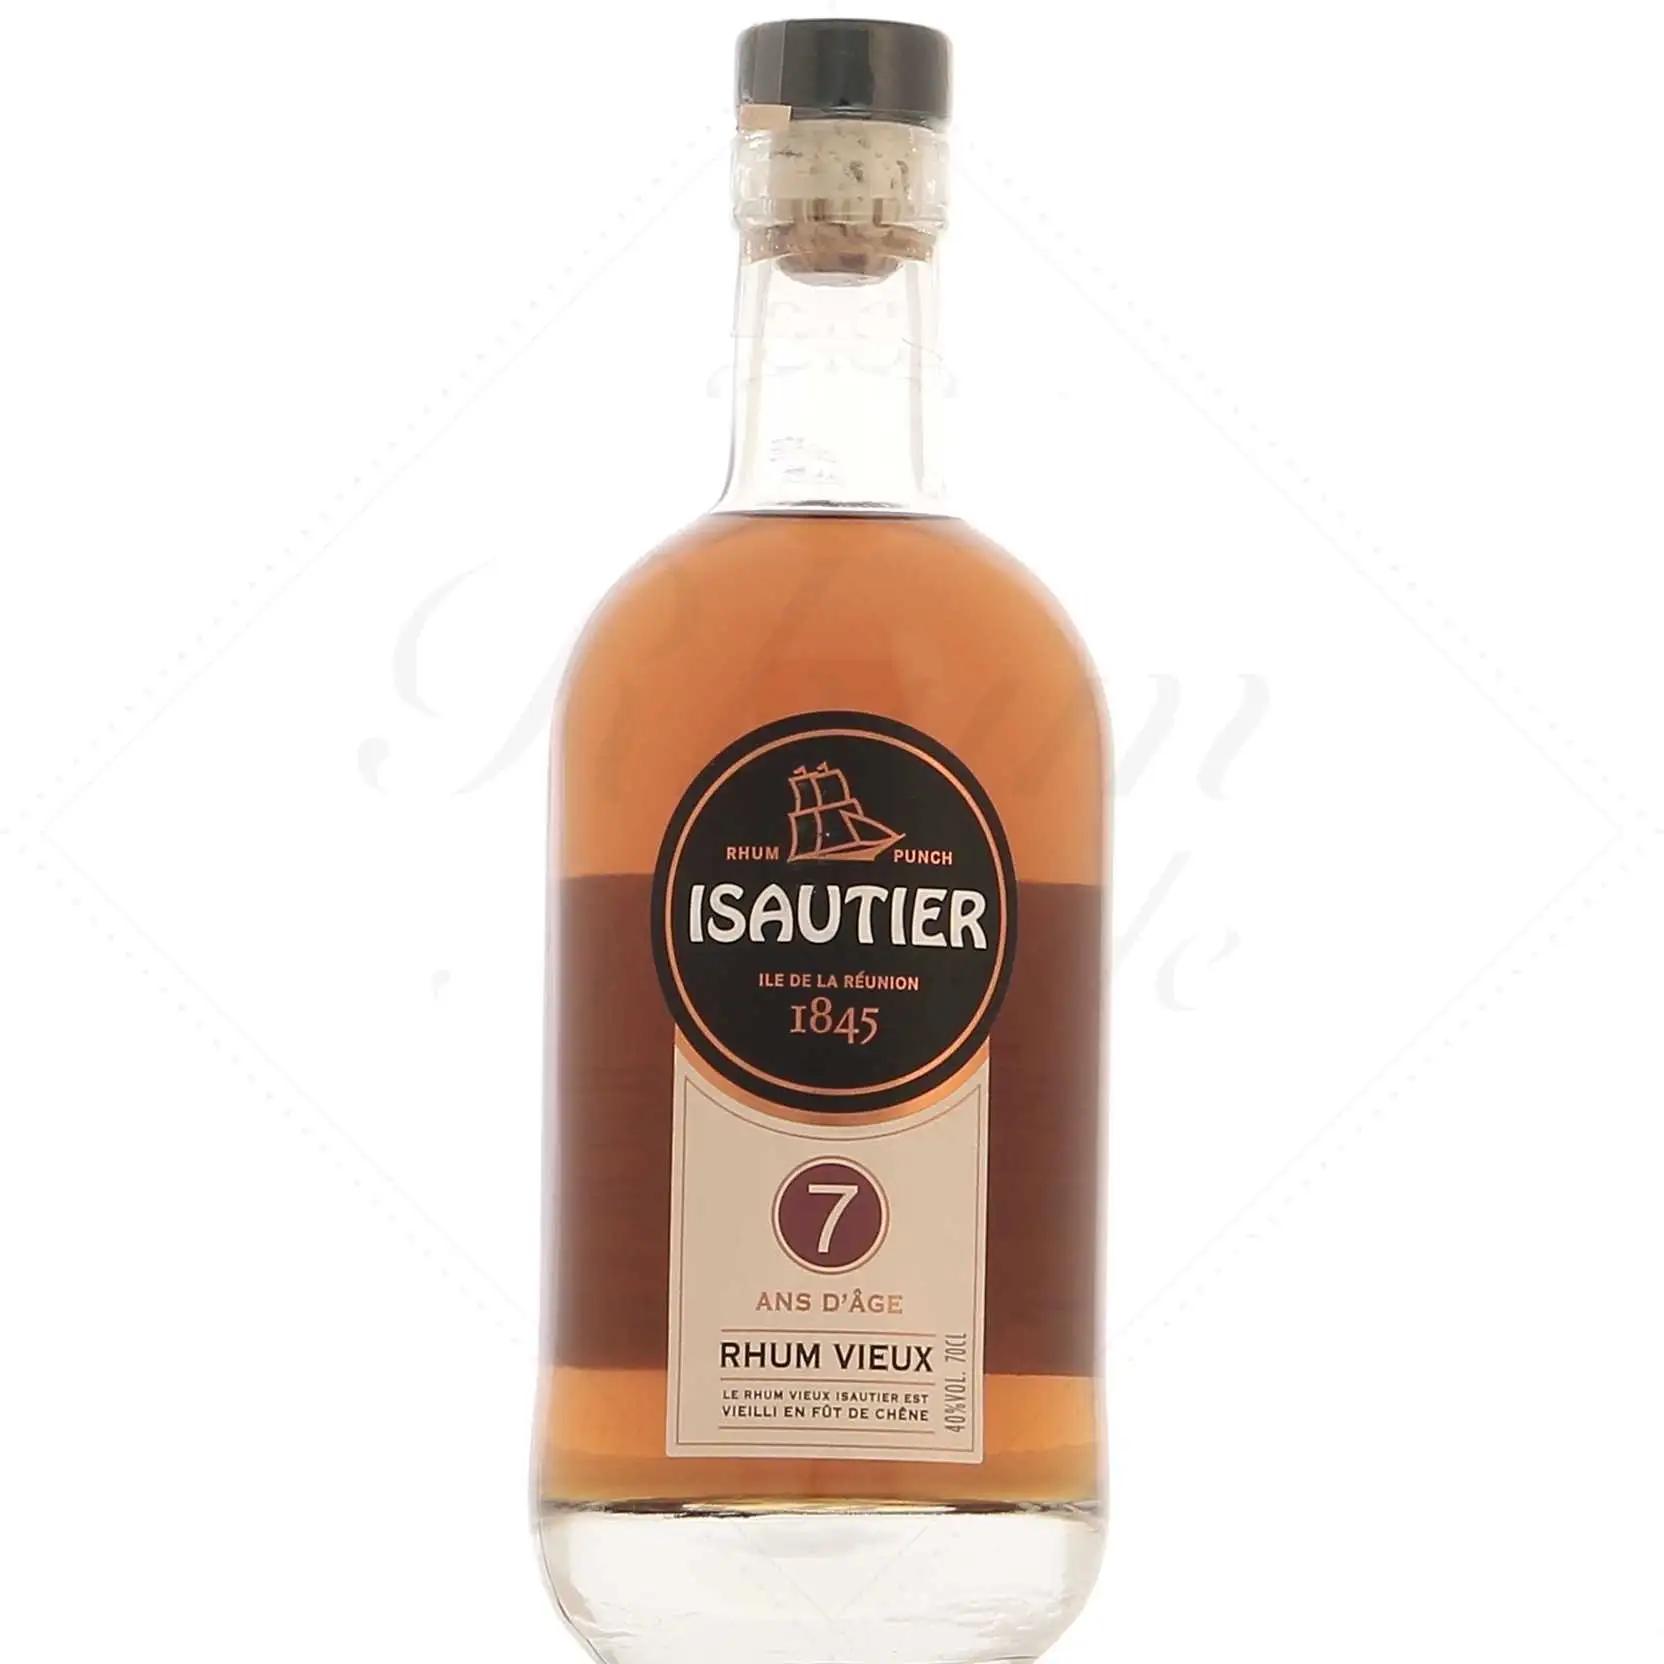 Image of the front of the bottle of the rum 7 Ans d‘Âge Rhum Vieux